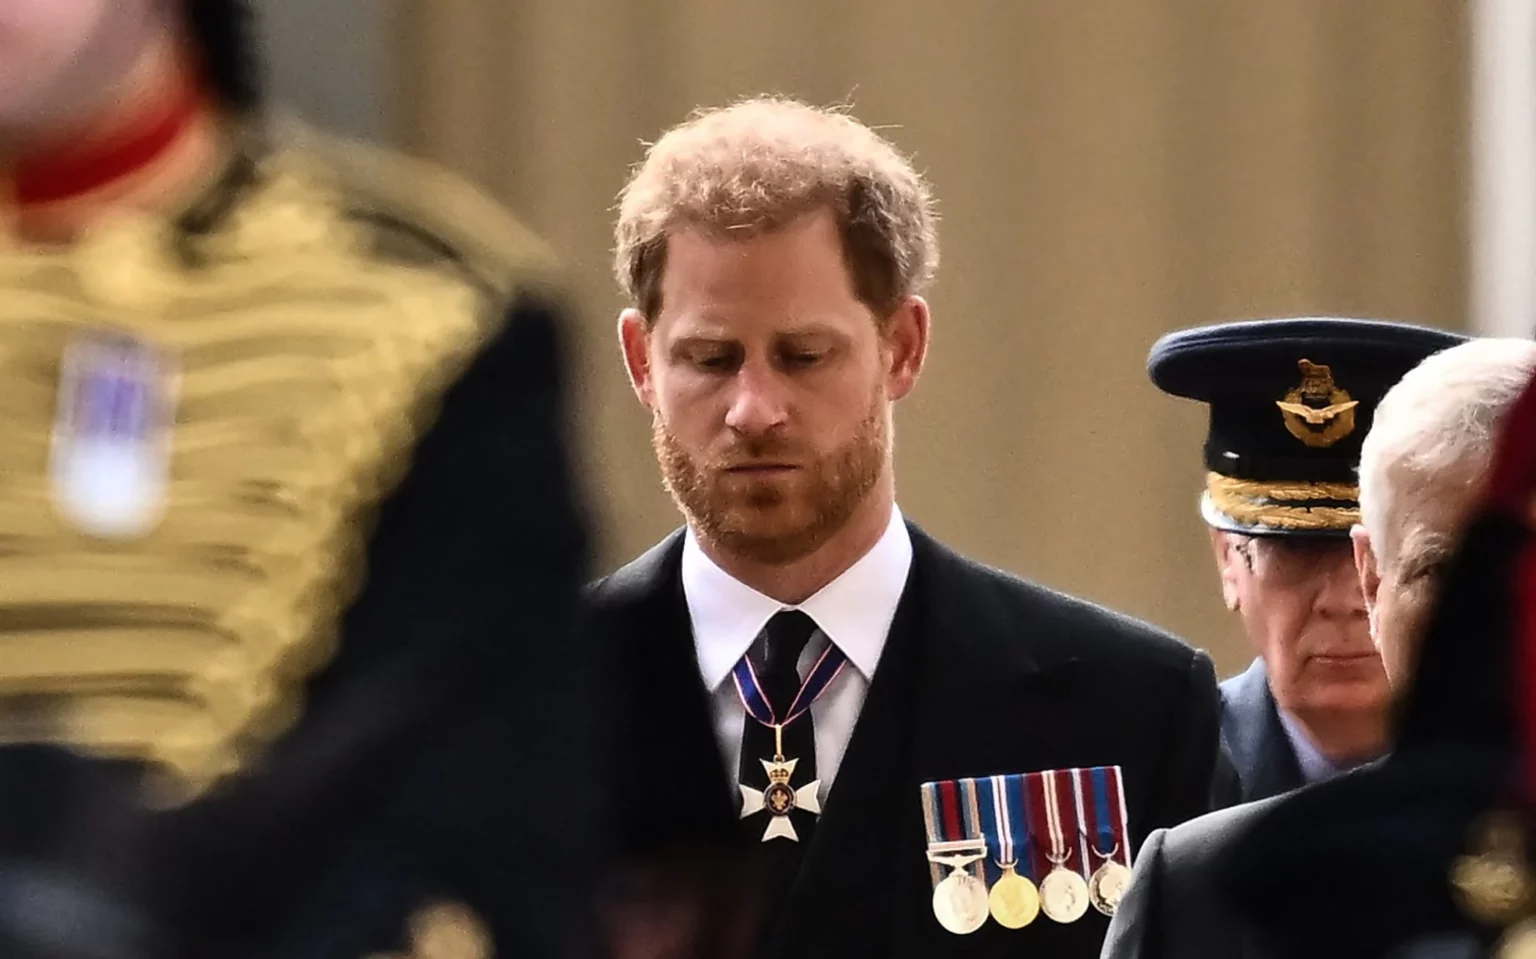 is-prince-harry-attending-king-charles-coronation-due-to-fear